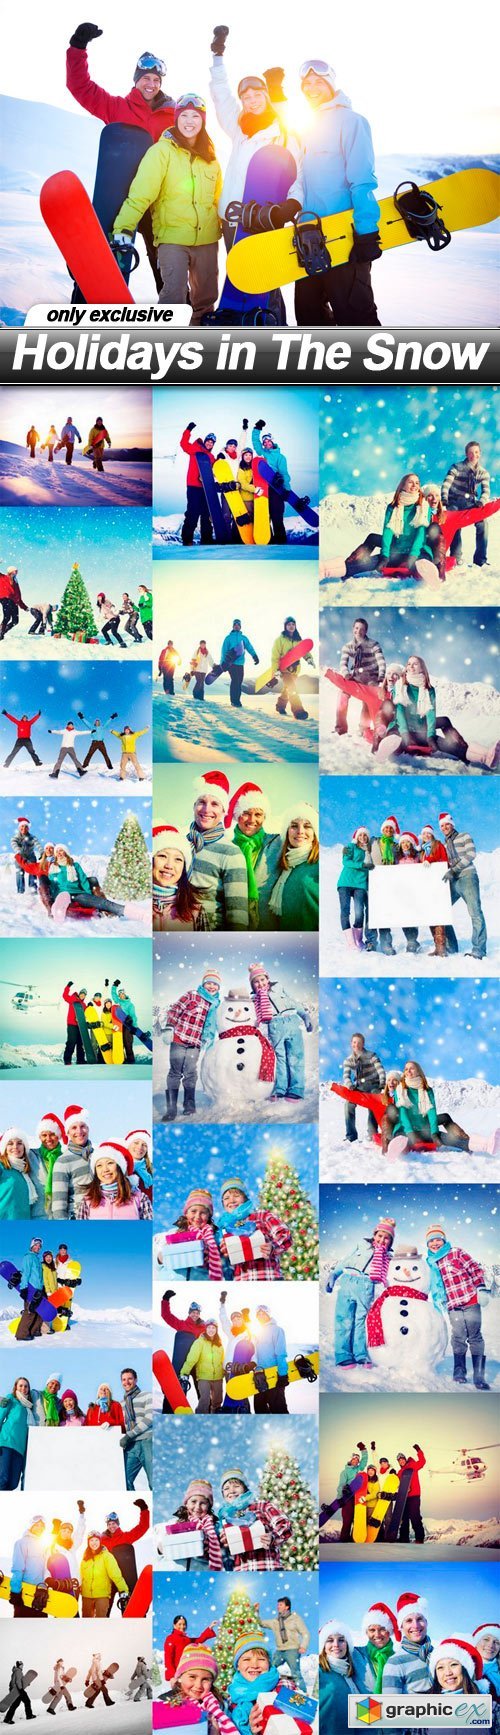 Holidays in The Snow - 25 UHQ JPEG